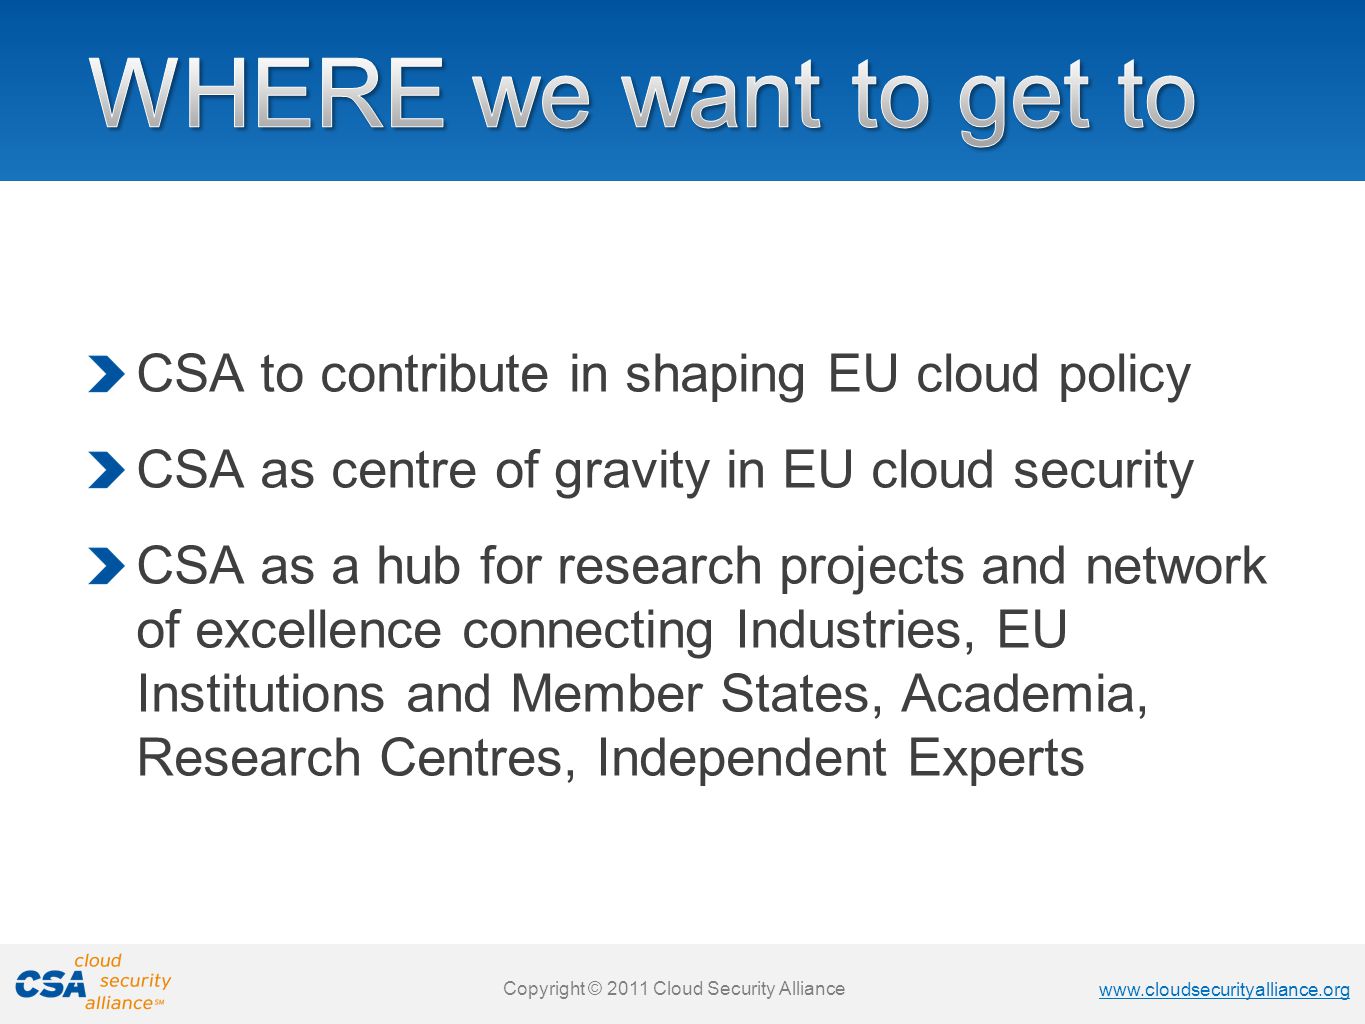 Copyright © 2011 Cloud Security Alliance   Copyright © 2011 Cloud Security Alliance   Copyright © 2011 Cloud Security Alliance   Copyright © 2011 Cloud Security Alliance CSA to contribute in shaping EU cloud policy CSA as centre of gravity in EU cloud security CSA as a hub for research projects and network of excellence connecting Industries, EU Institutions and Member States, Academia, Research Centres, Independent Experts